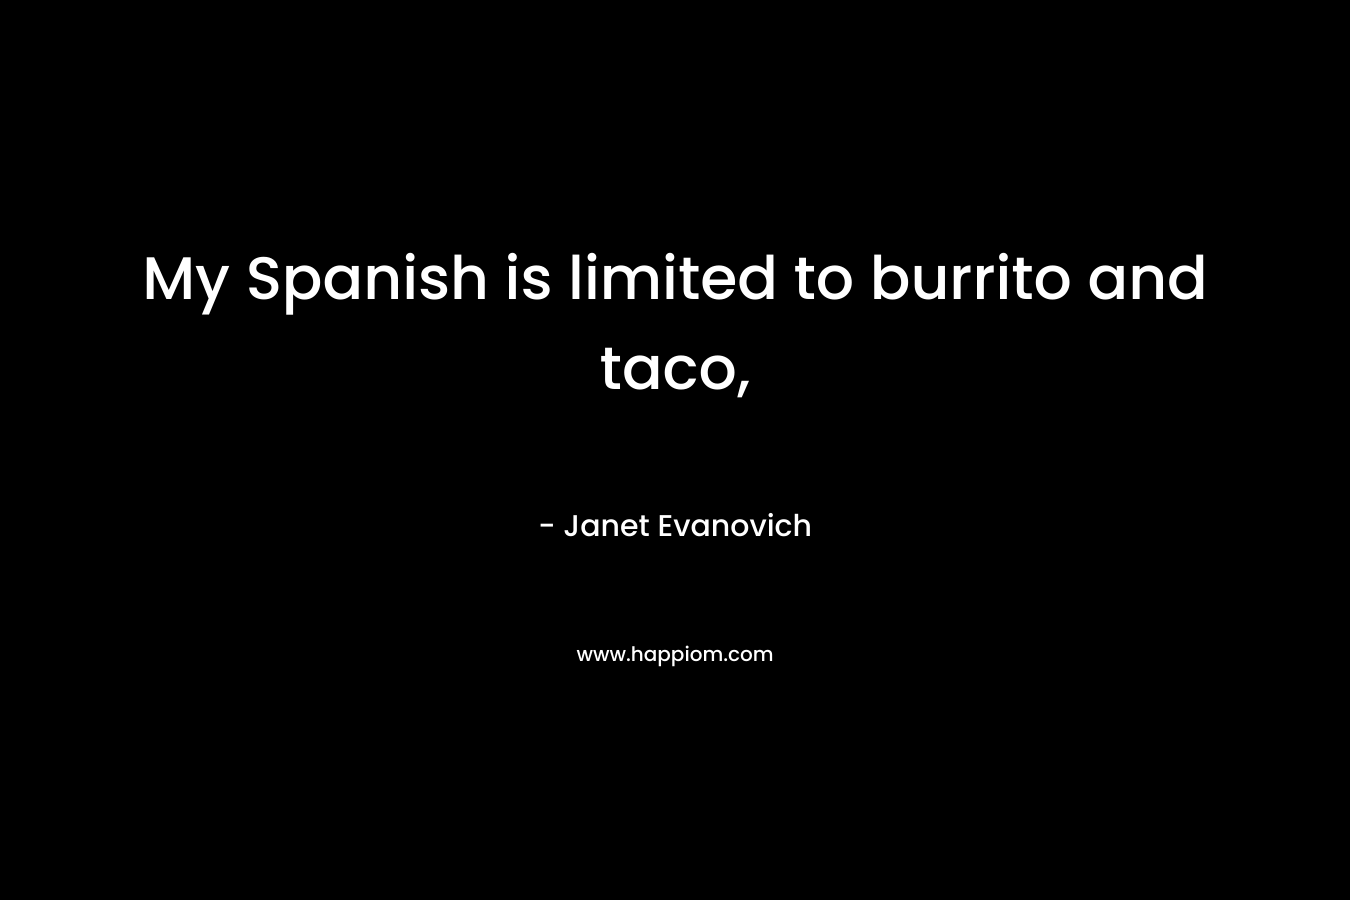 My Spanish is limited to burrito and taco,